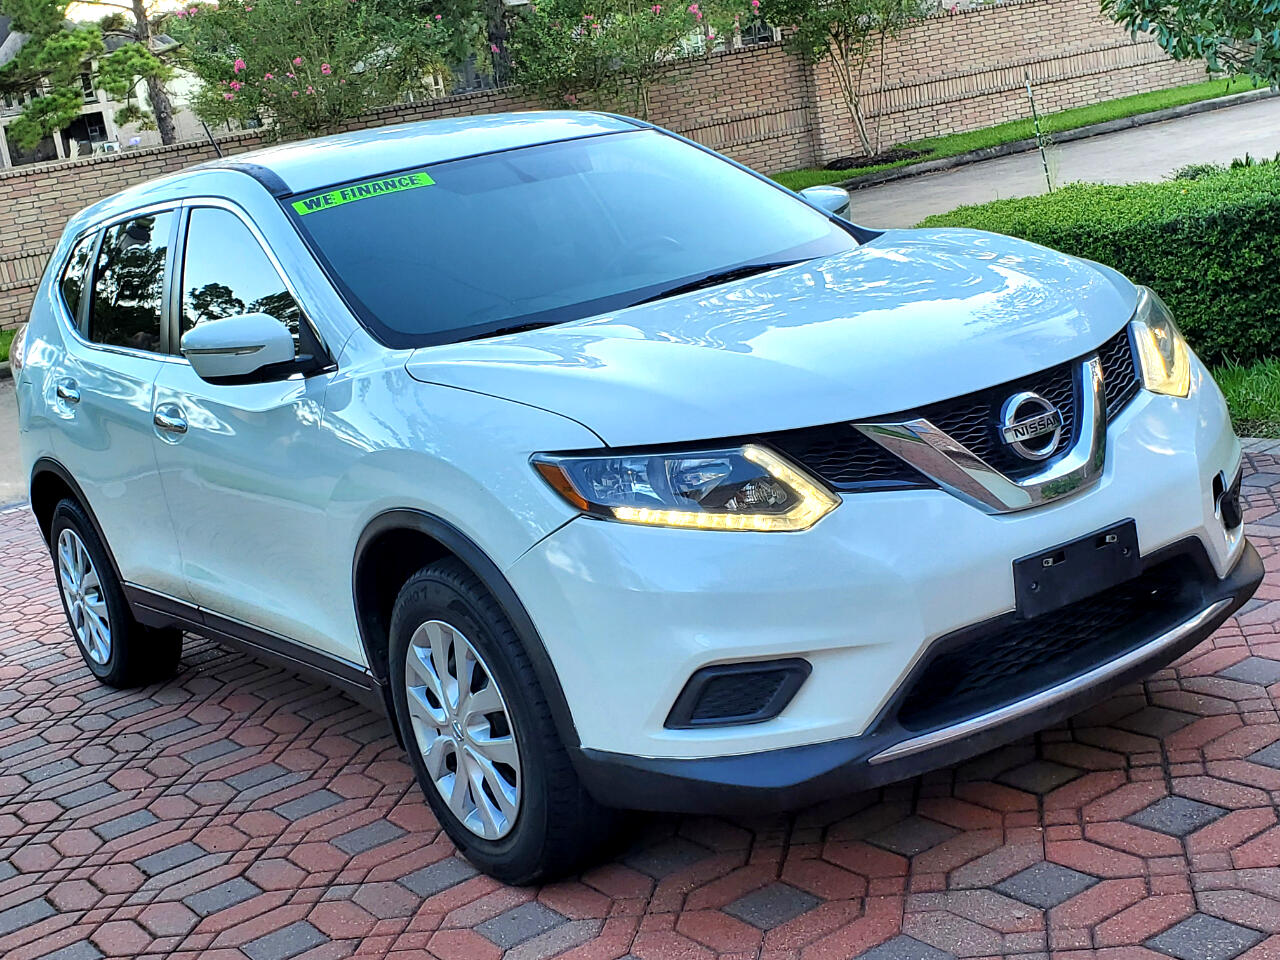 Used 2015 Nissan Rogue S 2WD for Sale in houston TX 77008 Auto Mall 2000